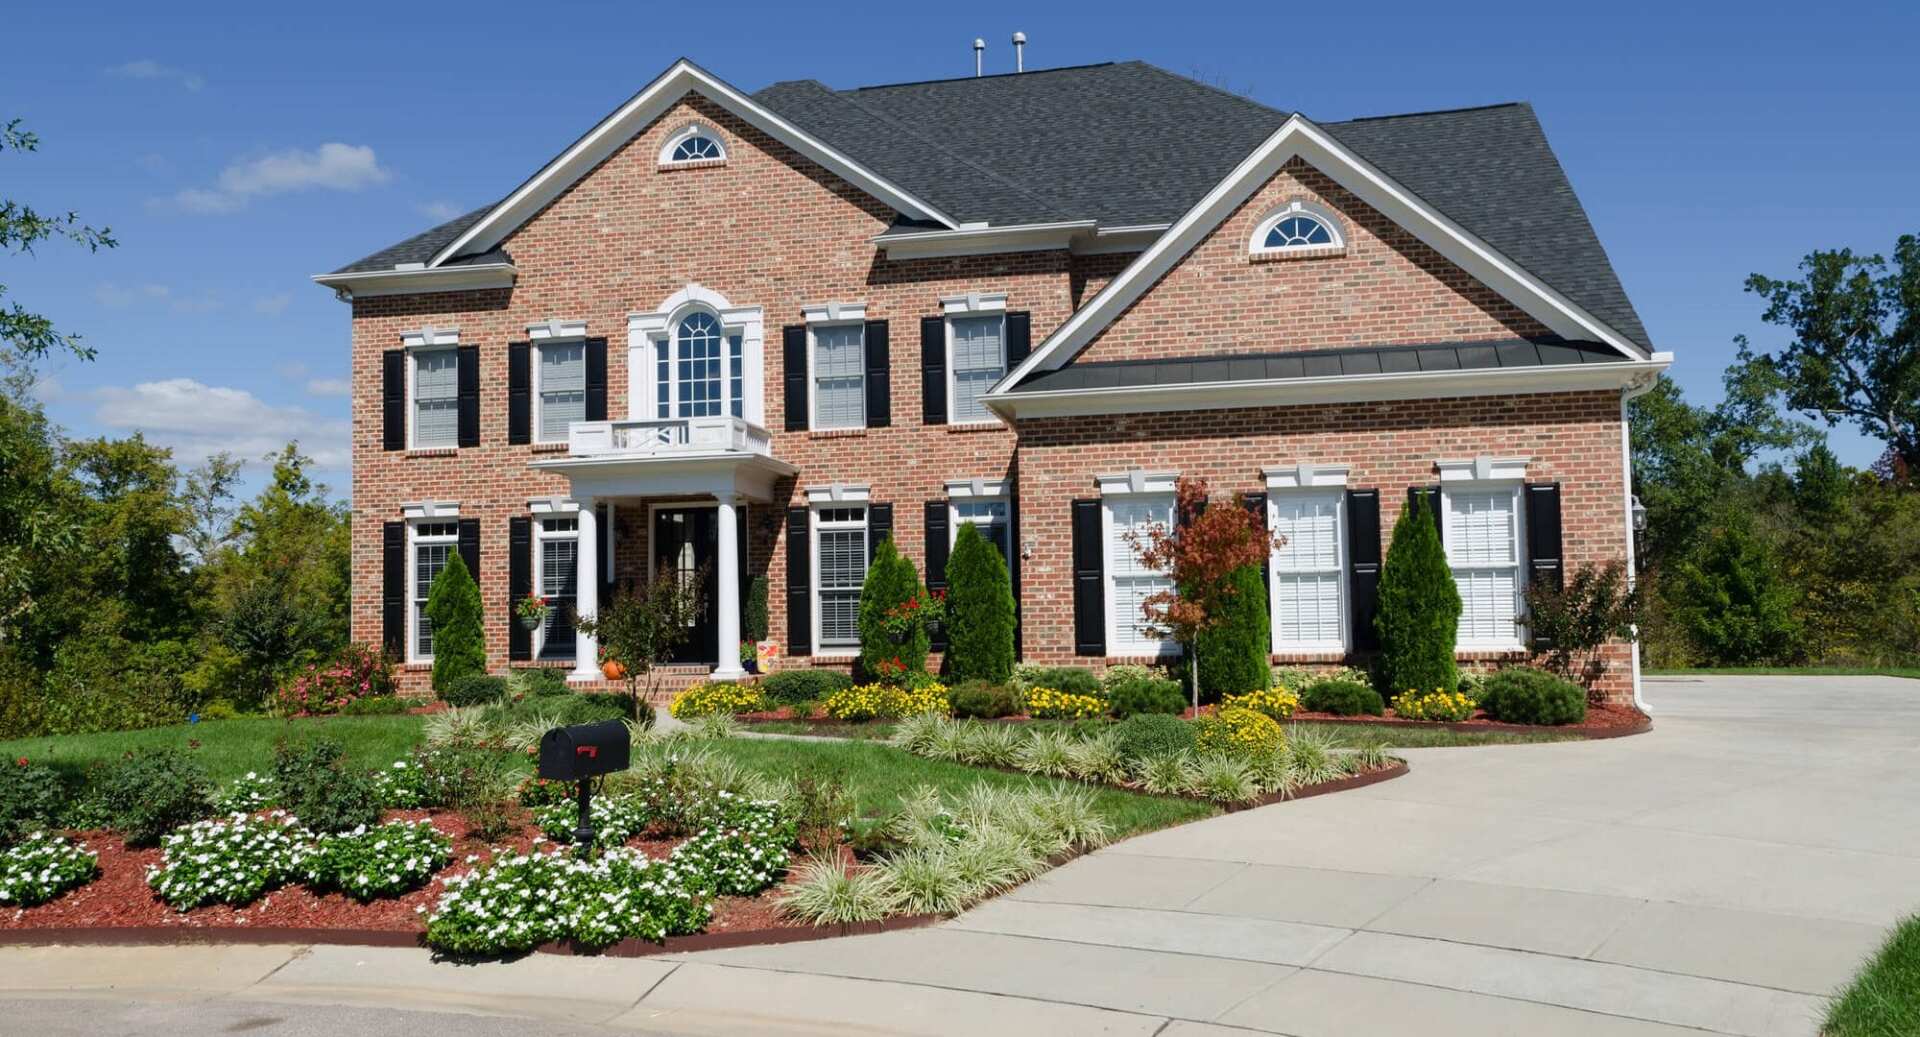 Choosing a Driveway Design To Match Your Landscaping